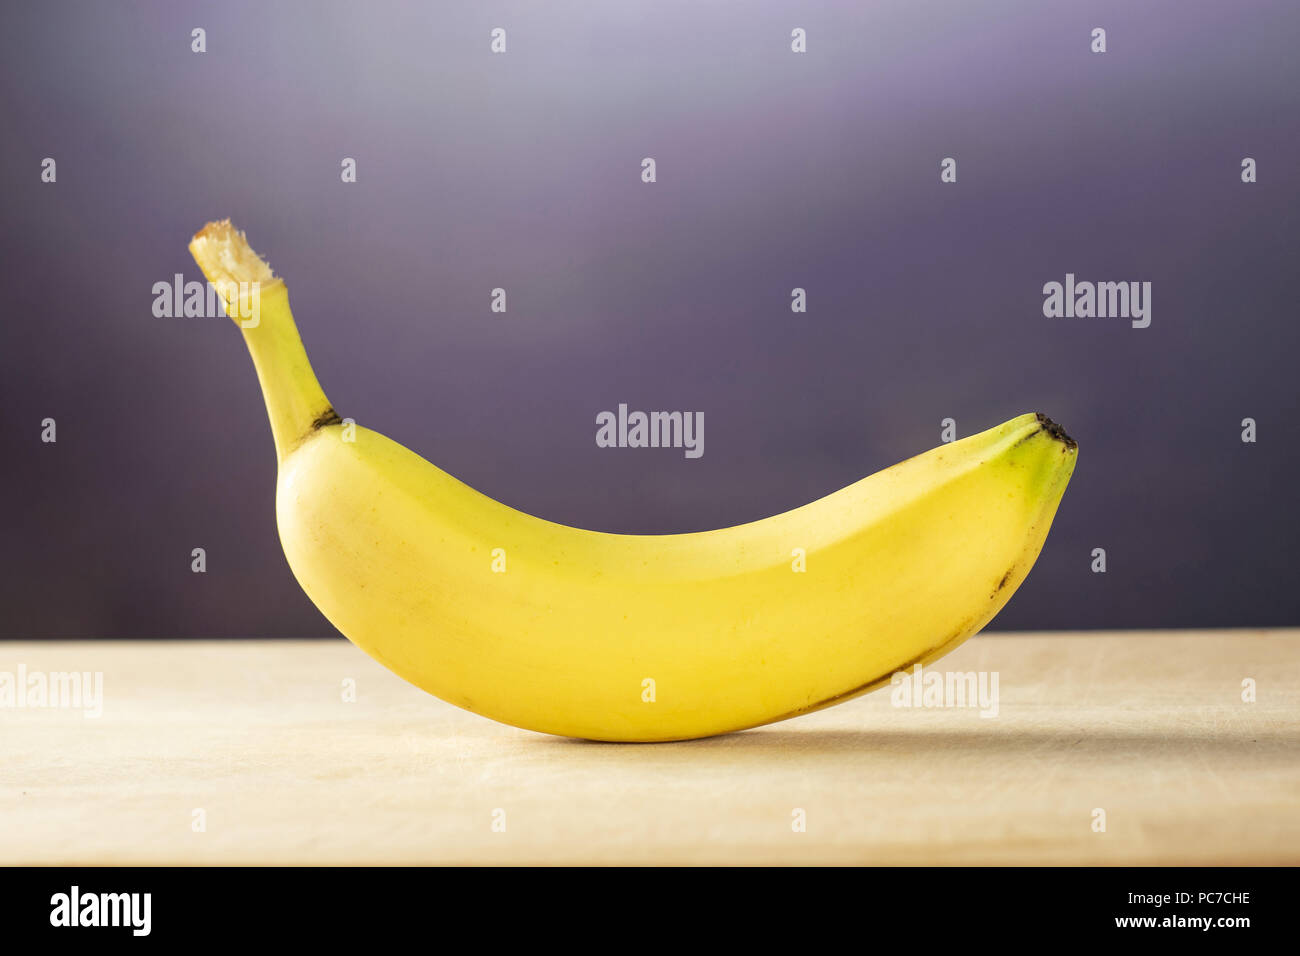 One whole fresh yellow banana with grey gradient behind Stock Photo